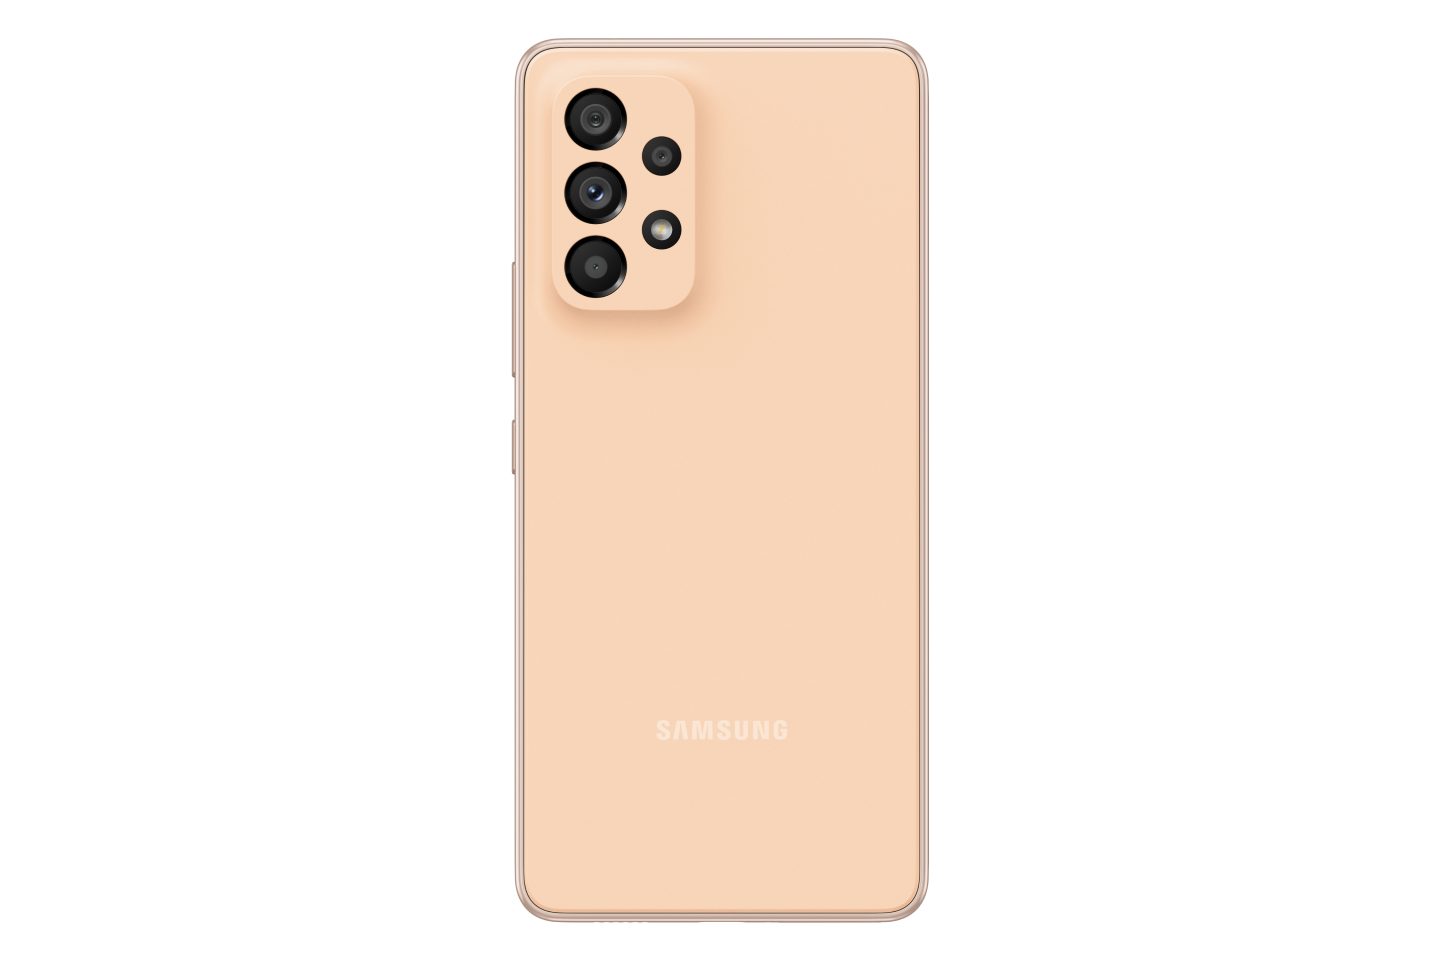 Samsung Galaxy A53  ( Peach )  5G Smartphone with 6.5" Super AMOLED Display, 120Hz Refresh Rate, Android 12, MicroSD Slot Up to 1TB, 5000 mAh Battery 